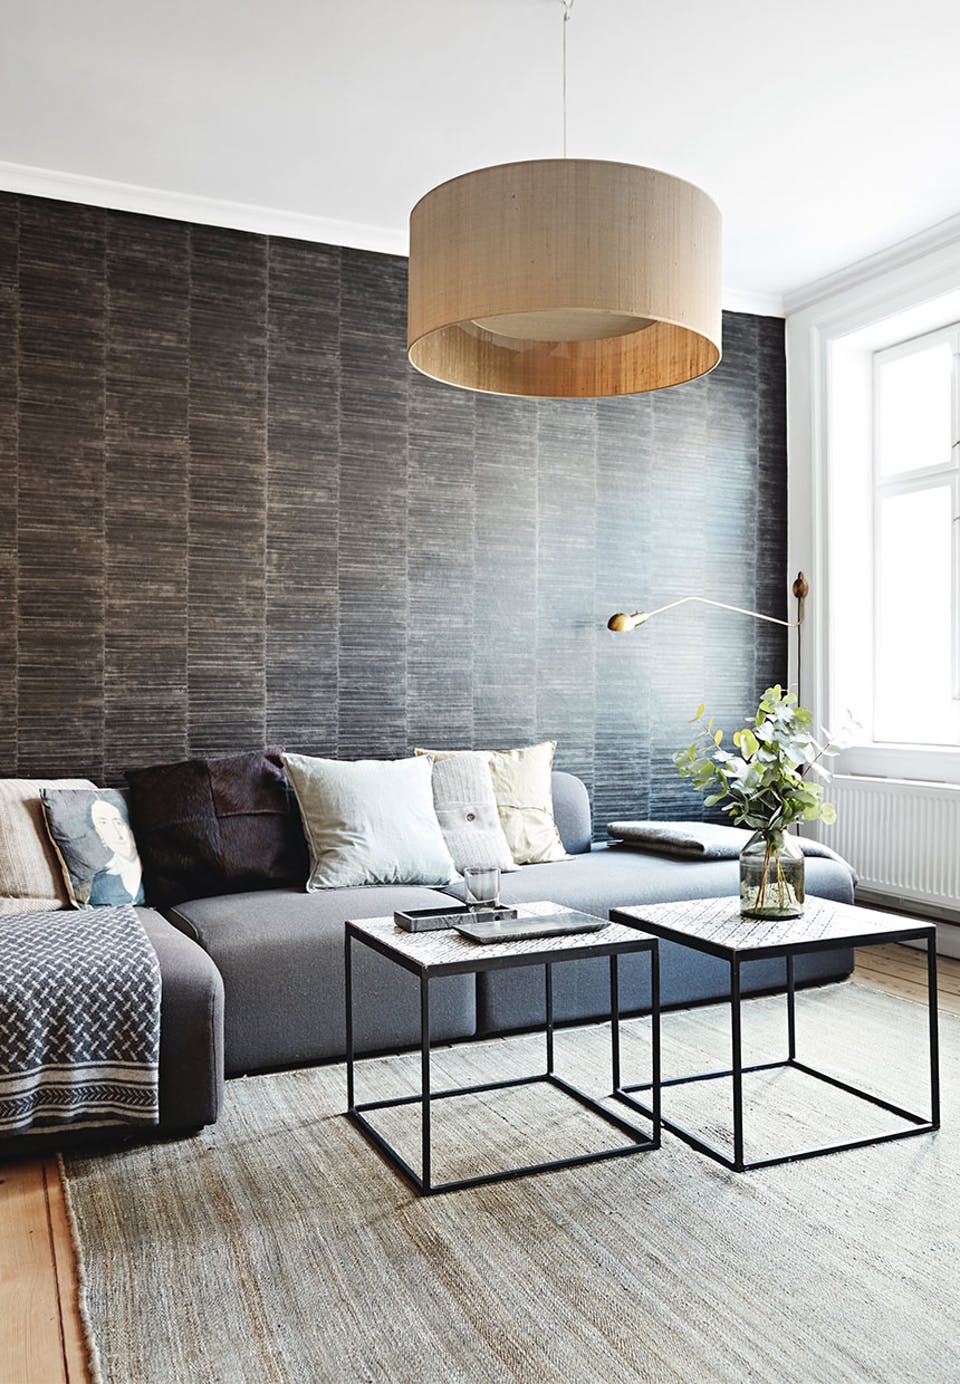 The living room is another space with an eye catchy wallpaper wall, and this one imitates chocolate wood planks